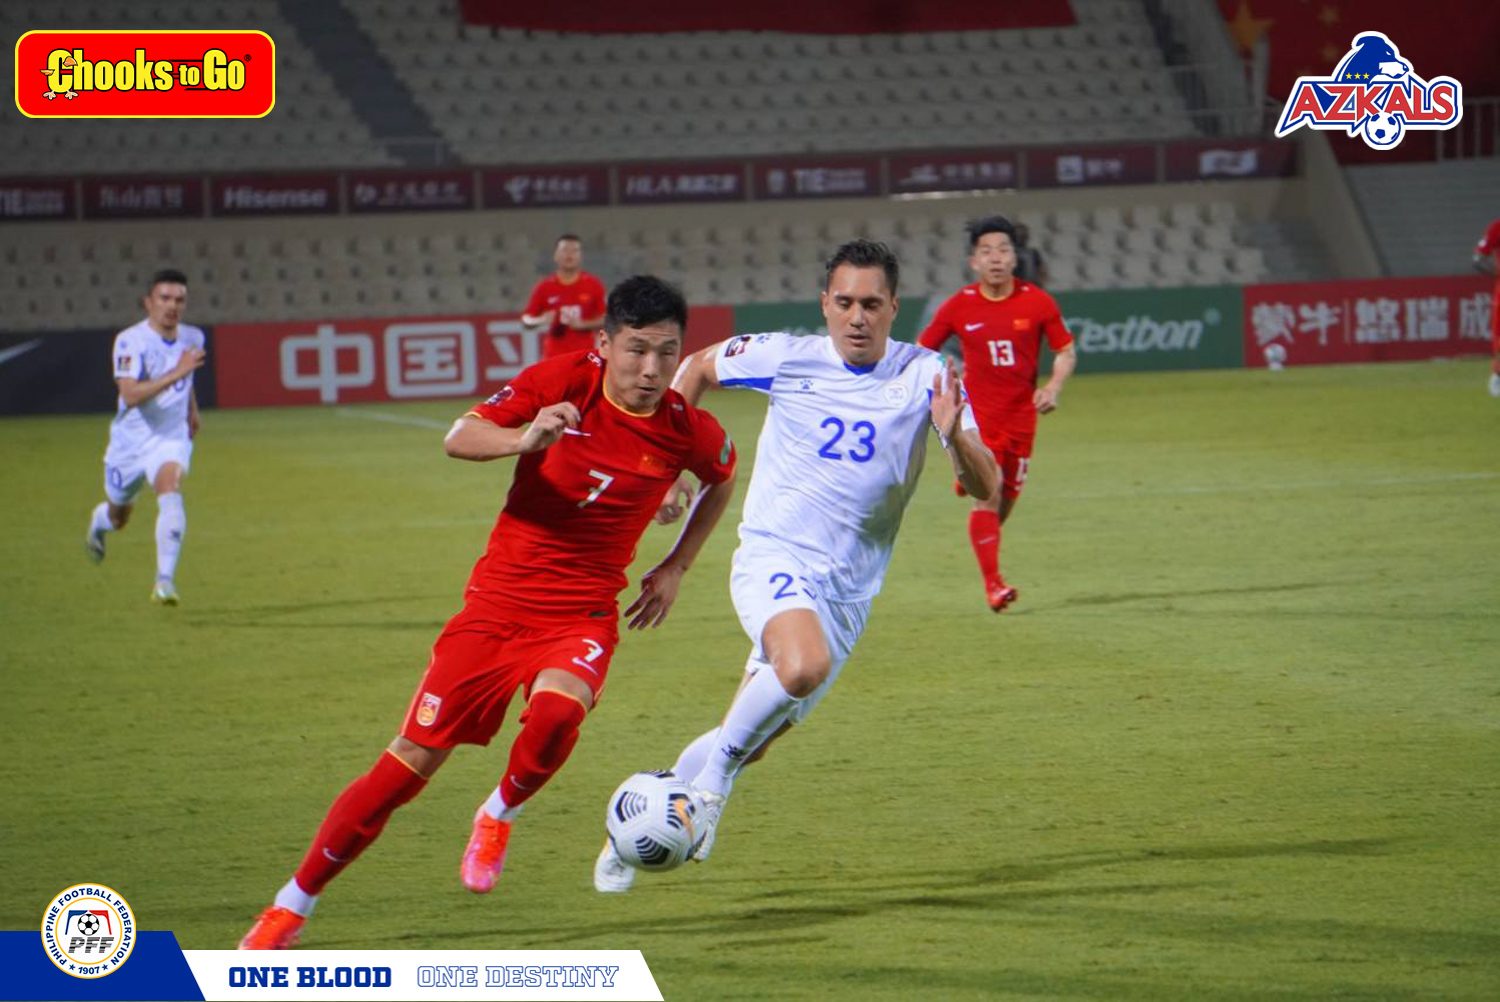 Azkals fall to China in World Cup qualifiers return